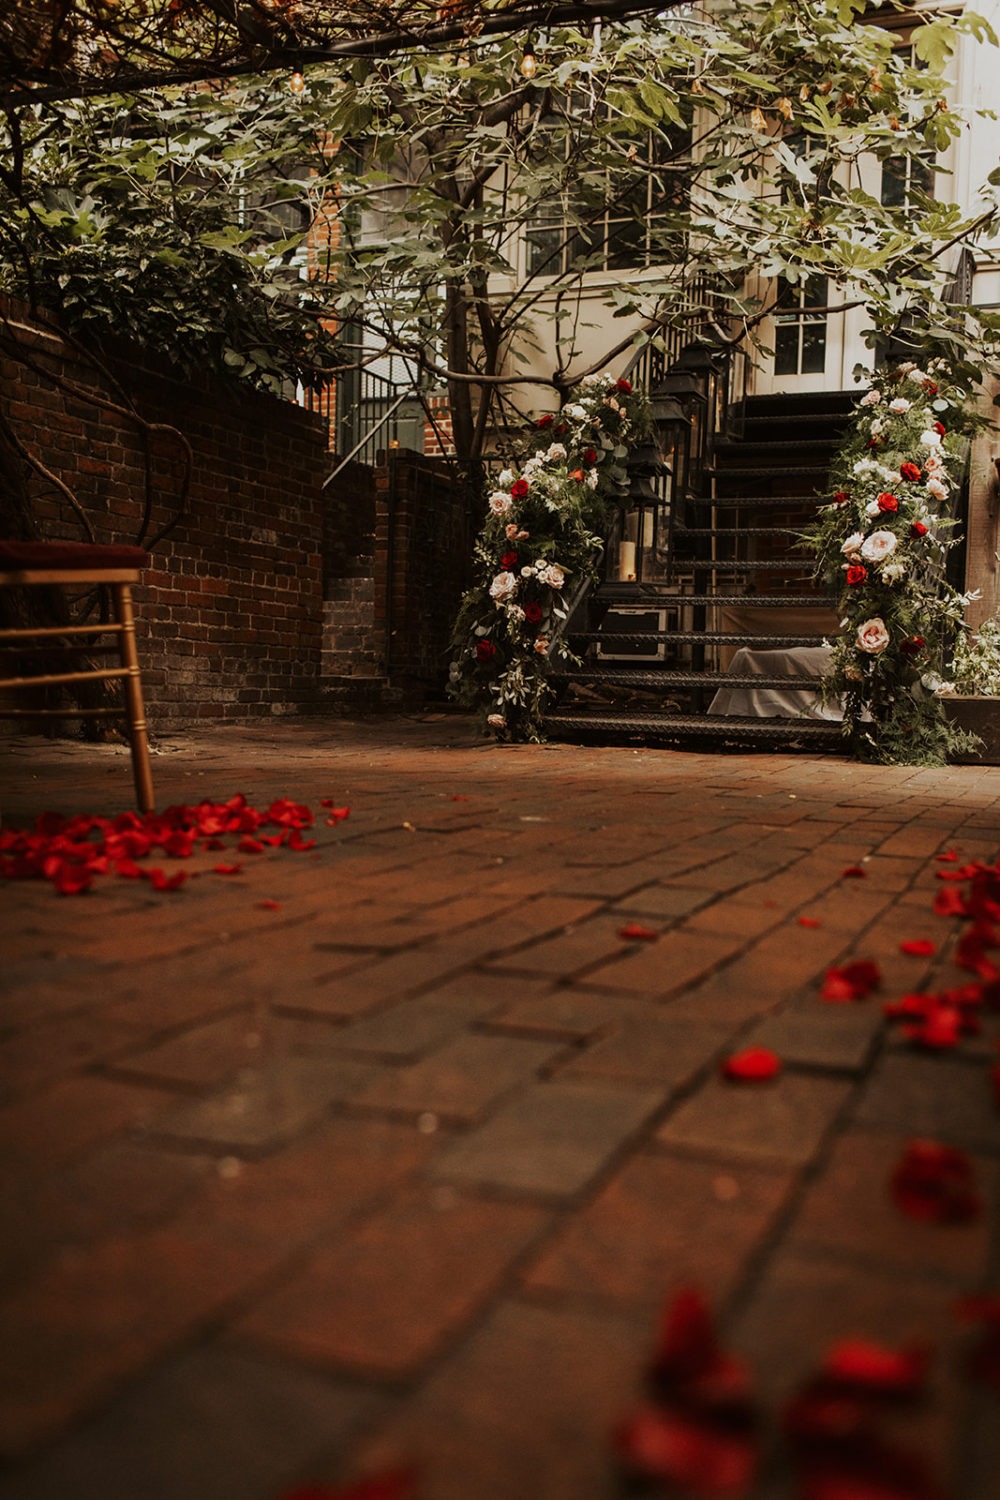 Flower petals decorate the ground at Iron Gate Restaurant: one of the best wedding venues in dc